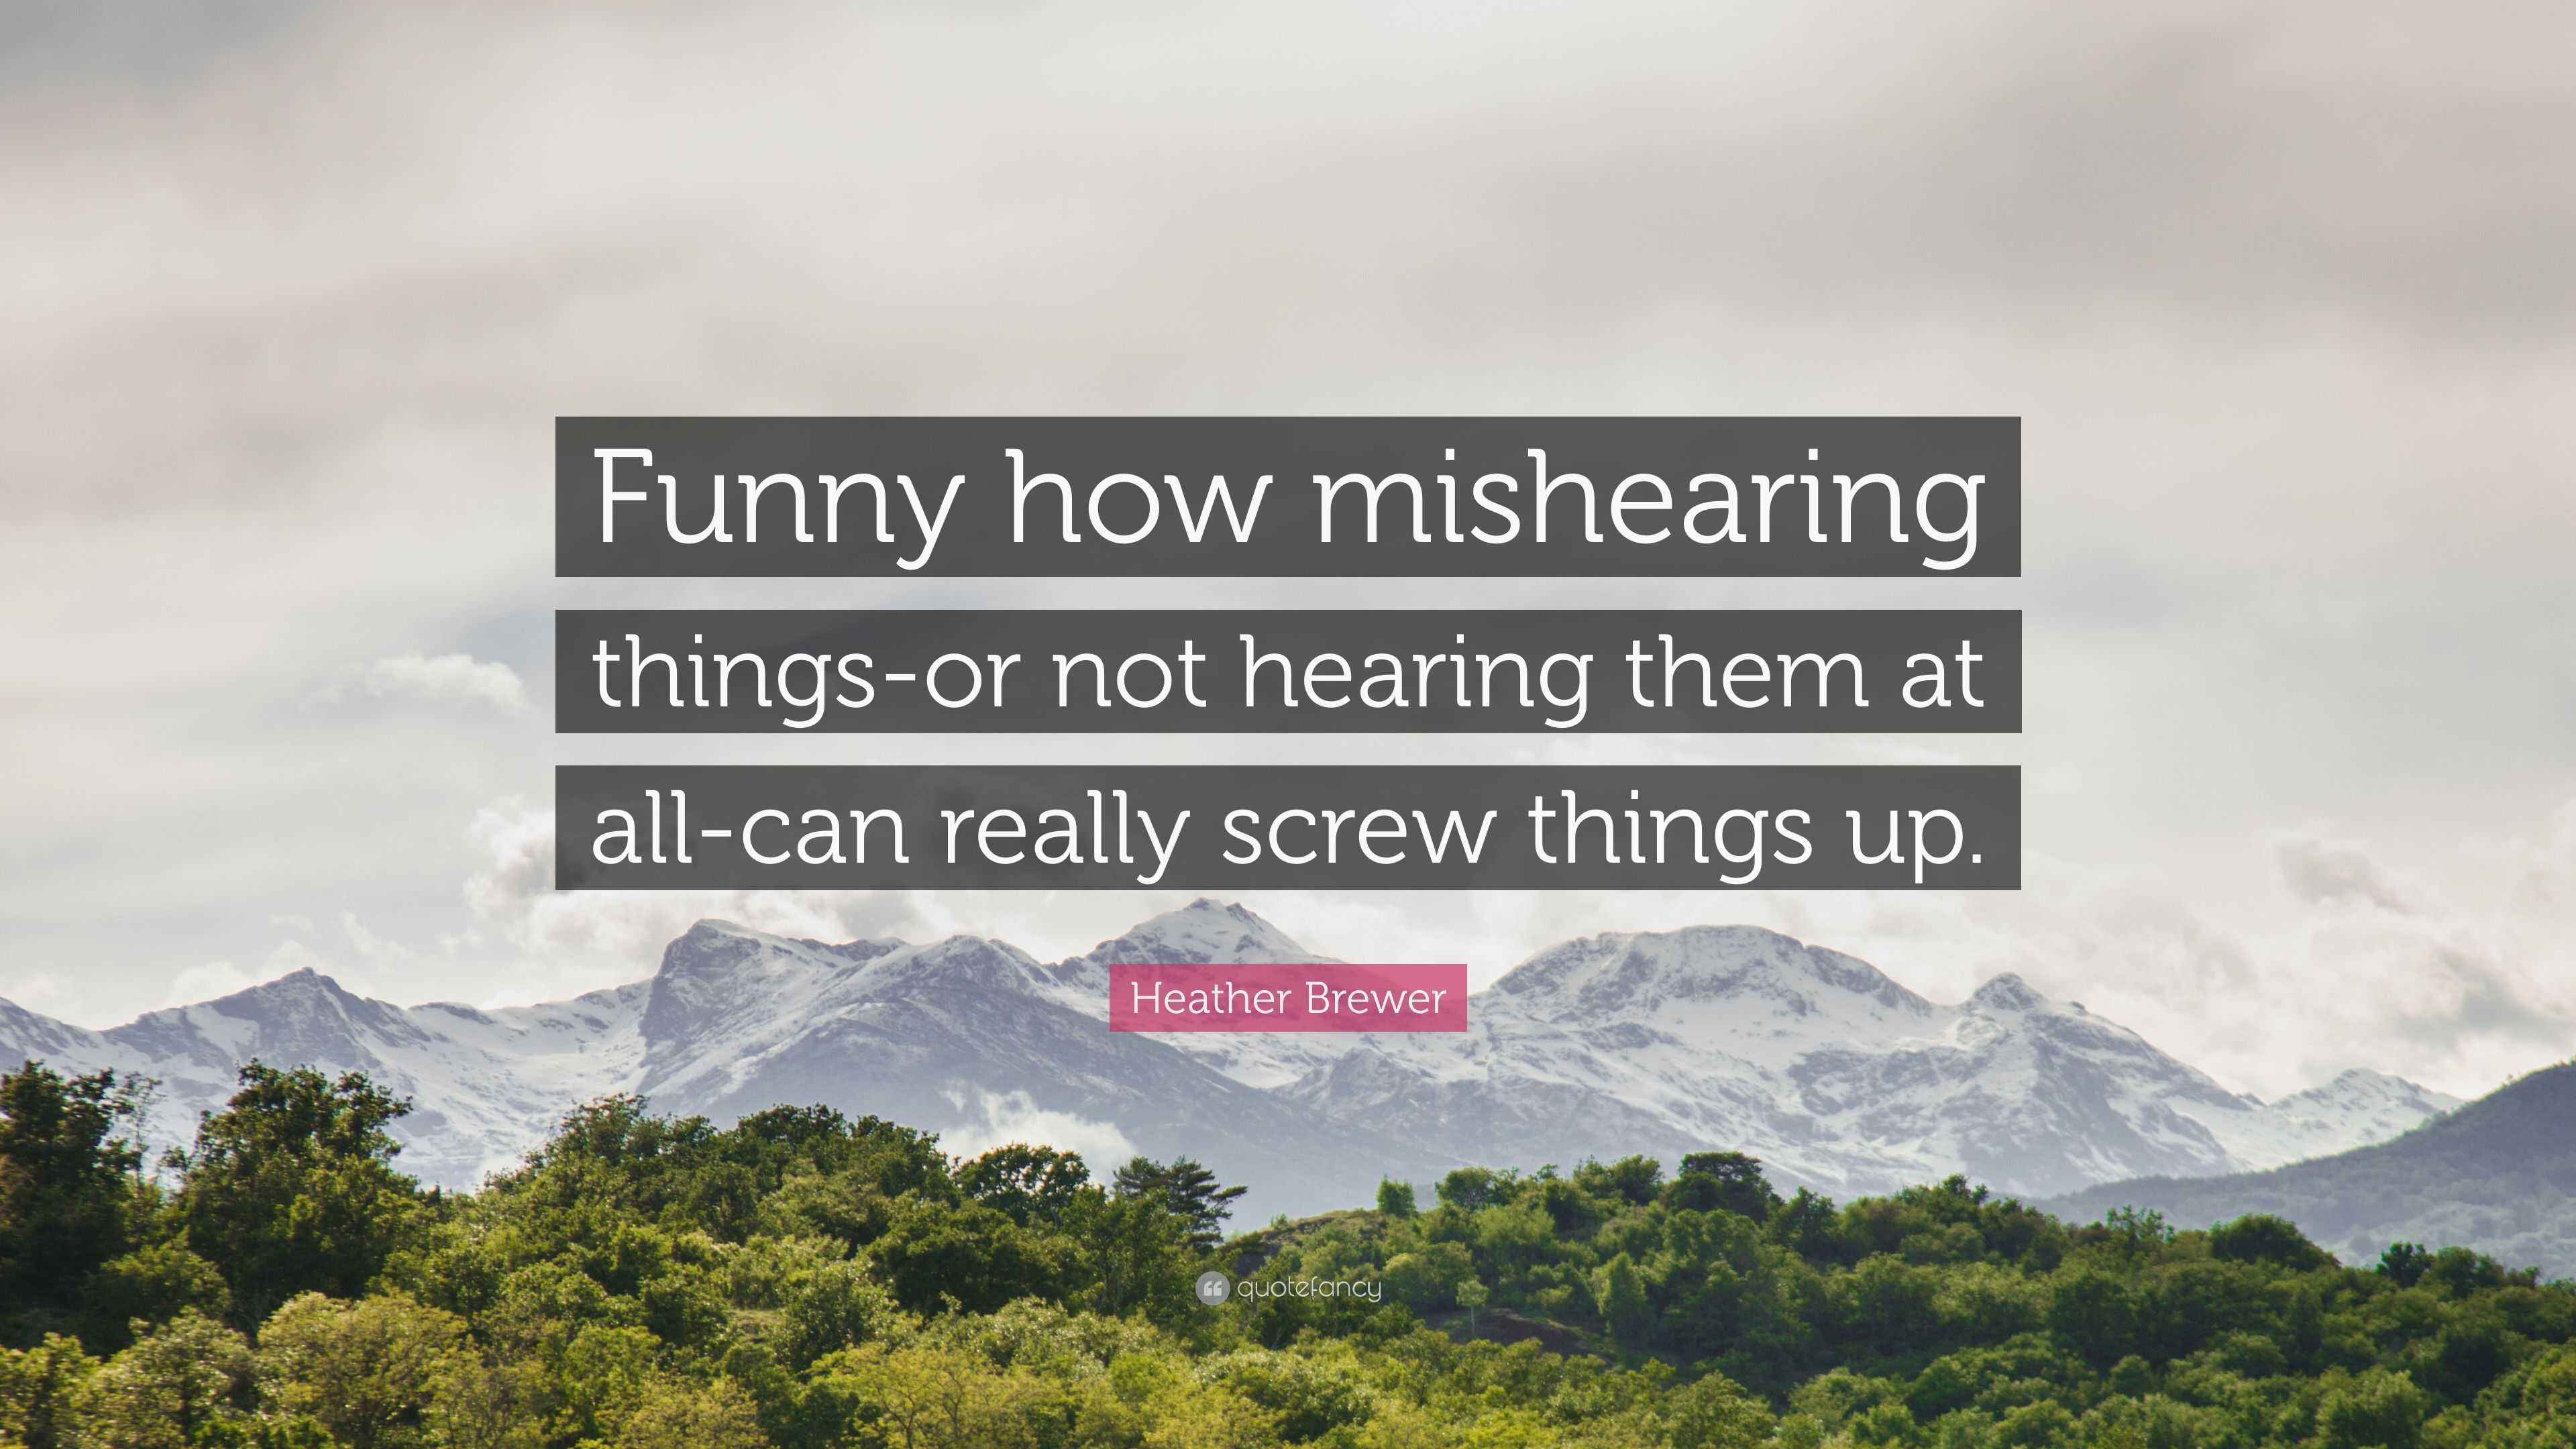 Heather Brewer Quote: “Funny how mishearing things-or not hearing them at  all-can really screw